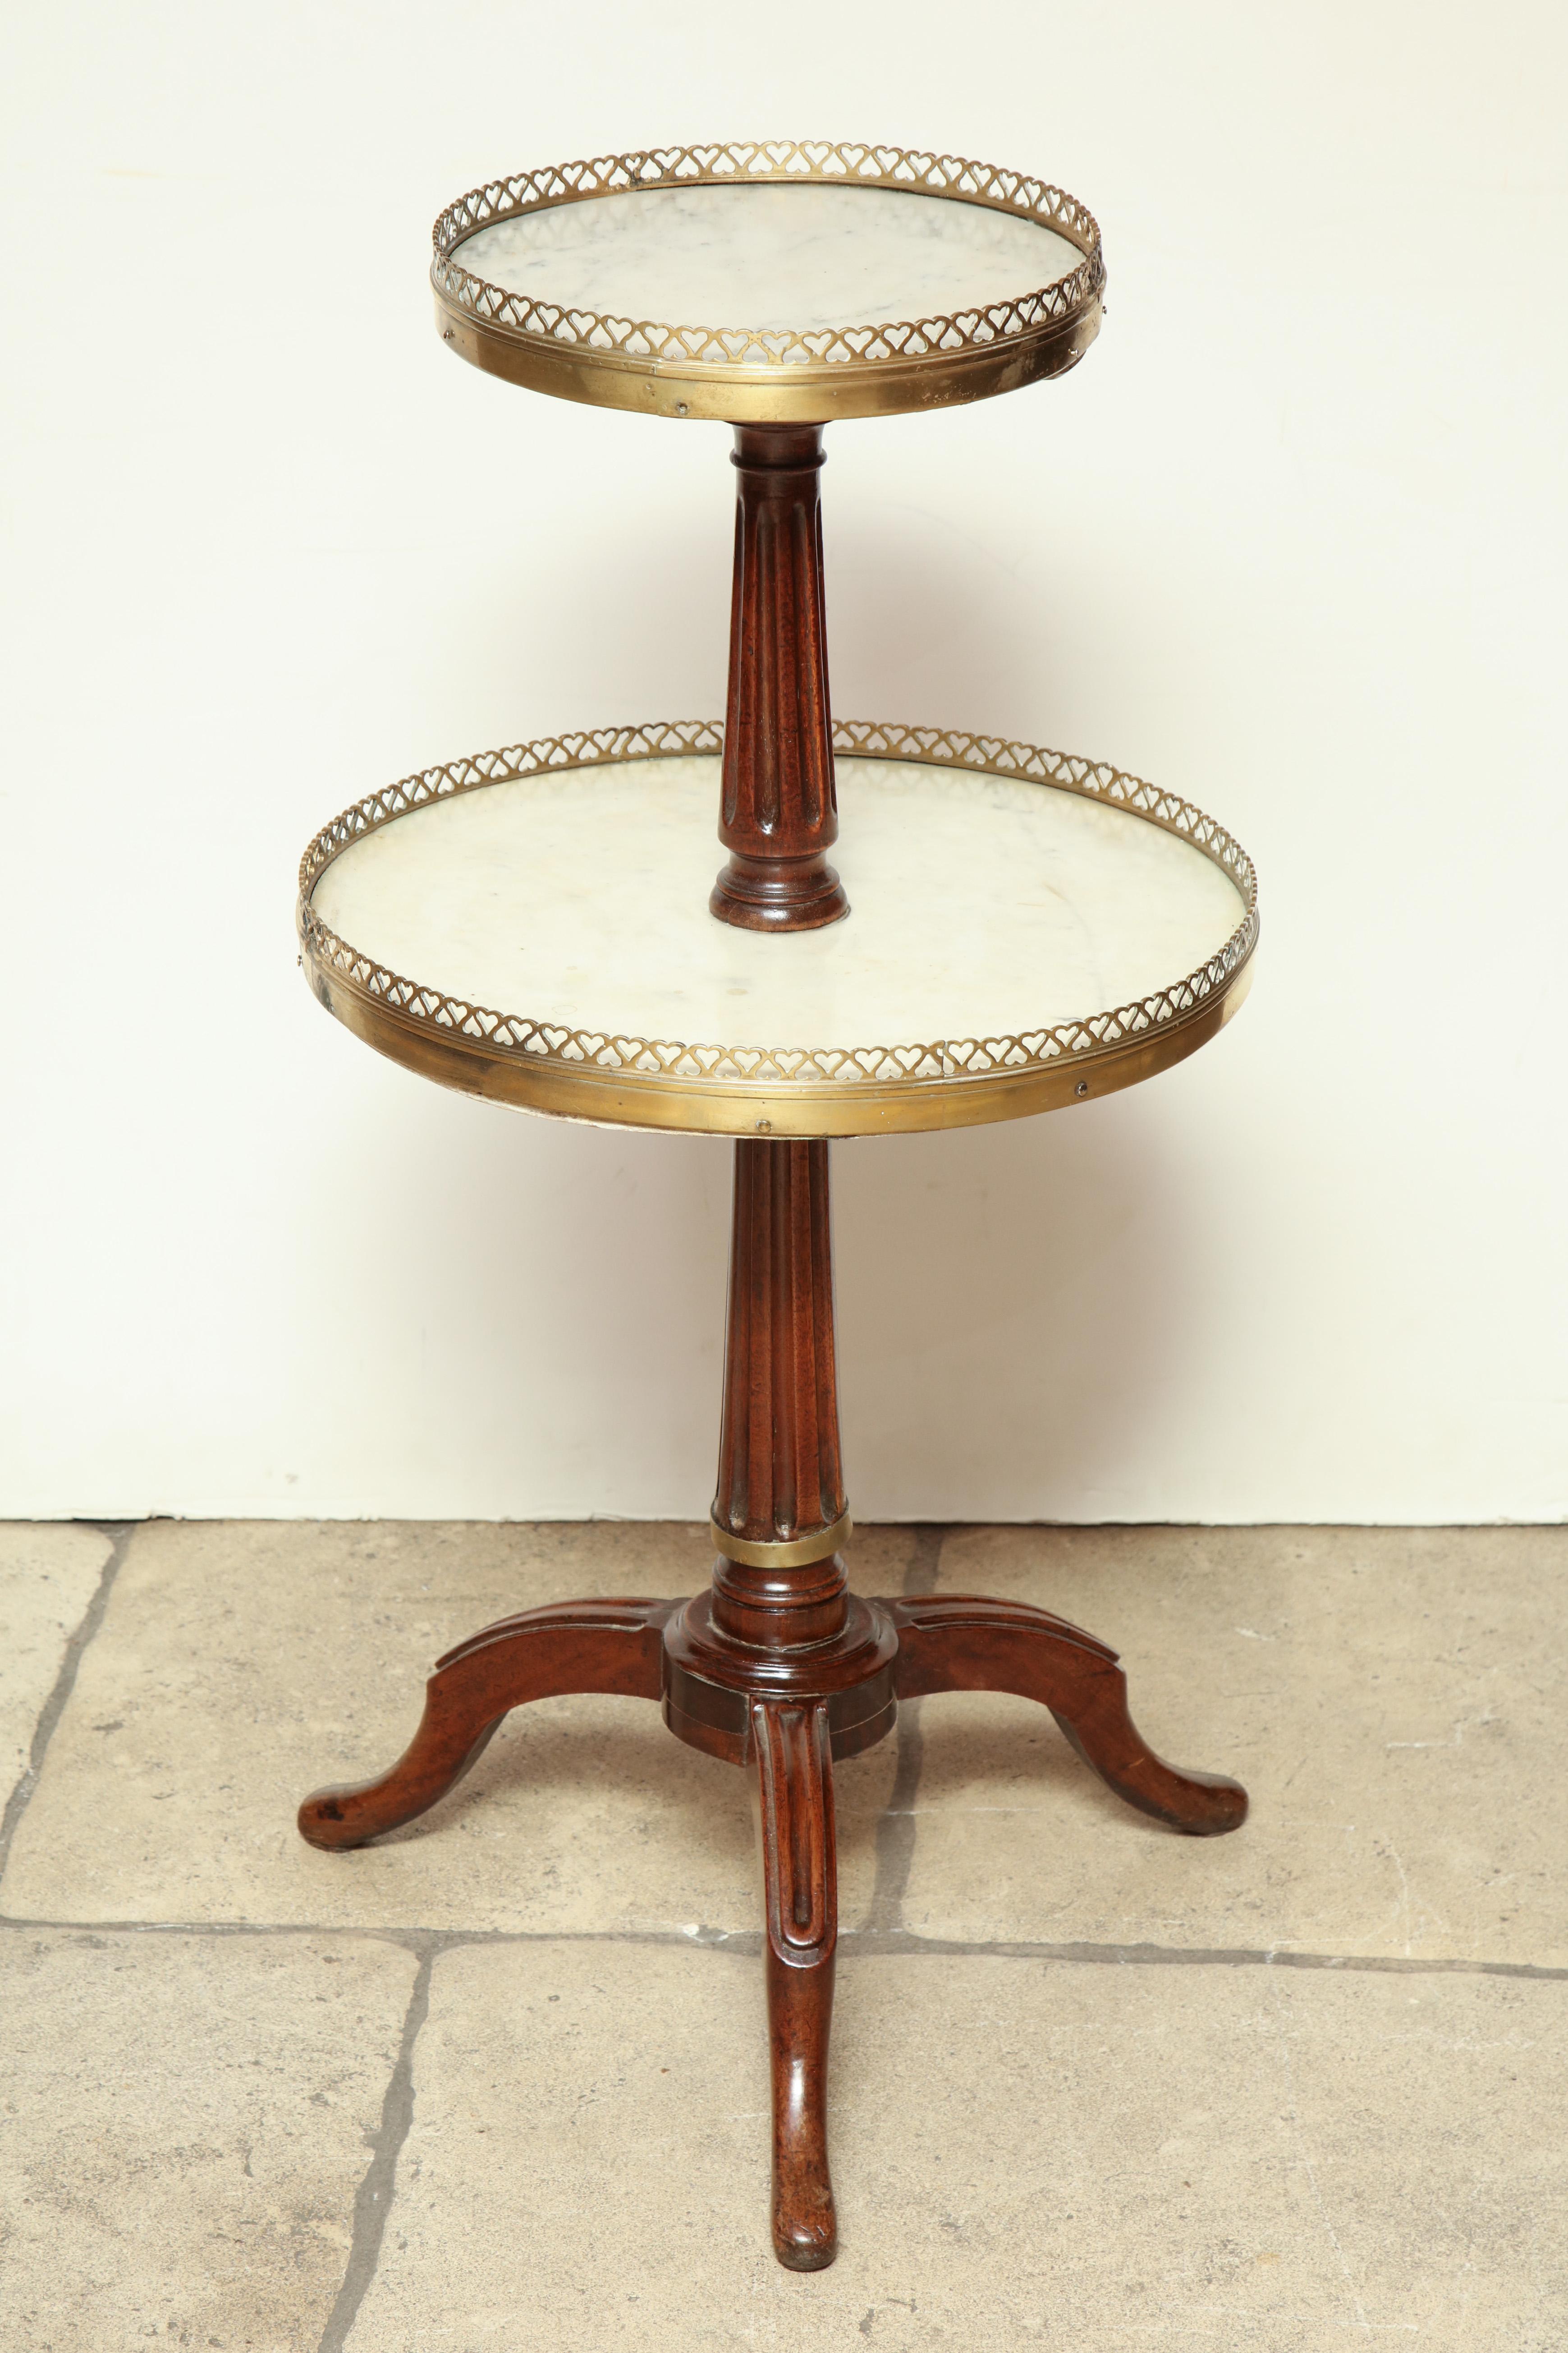 A sweet little French Directoire mahogany two-tier pastry table with marble tops, pierced bronze galleries, a turned and fluted column support with three outflaring legs.